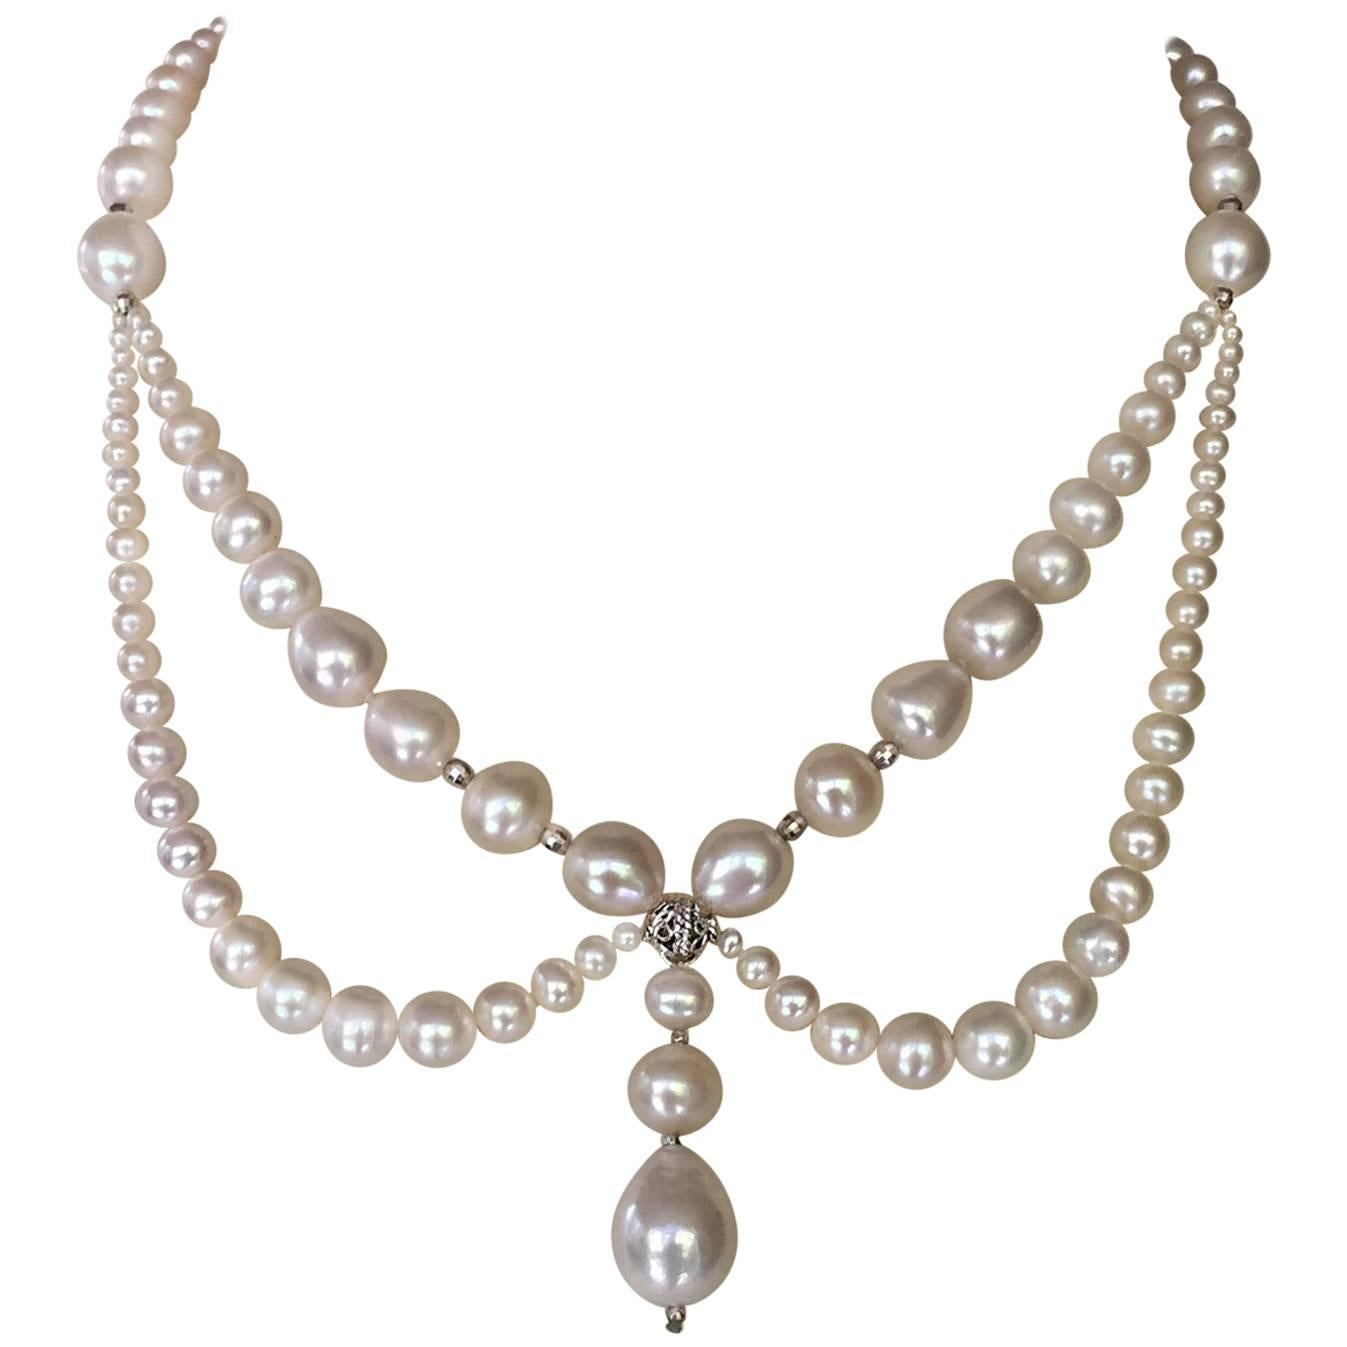 Graduated Pearl Necklace Silver Rhodium Plated Beads and Clasp by Marina J